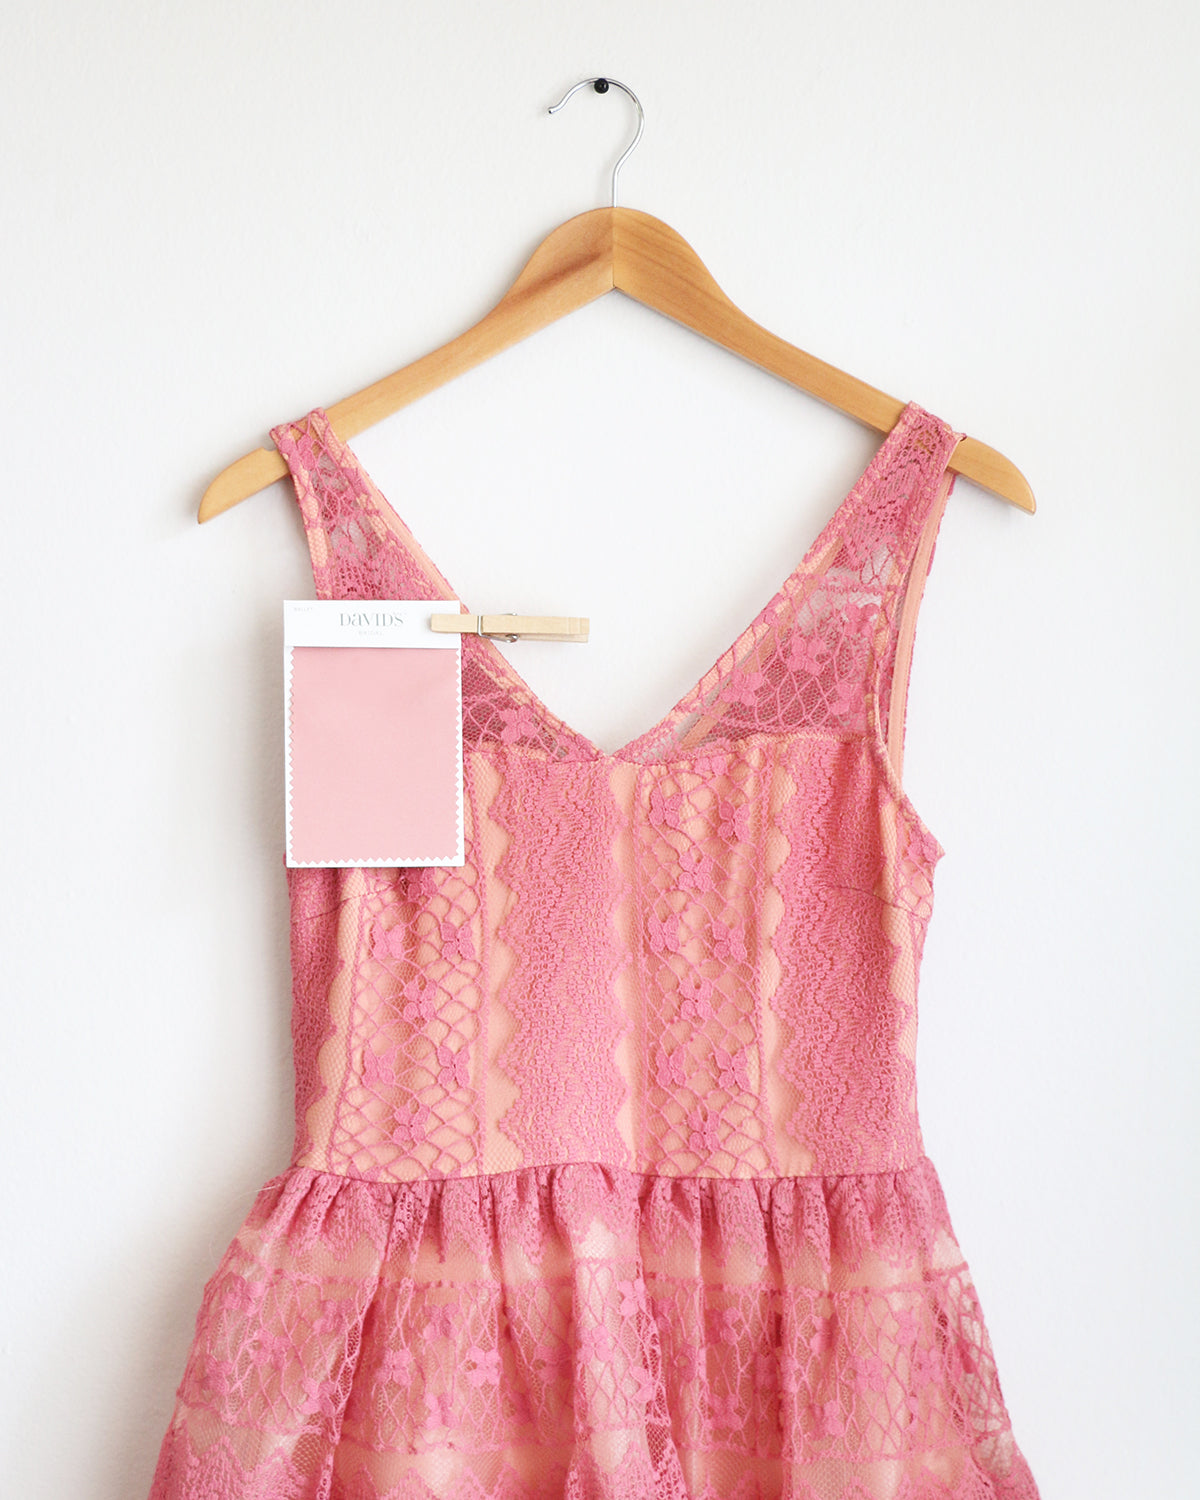 Apricity - RIVER Lace Dress in Dusty Rose Pink - David's Bridal Ballet bridesmaid dress swatch